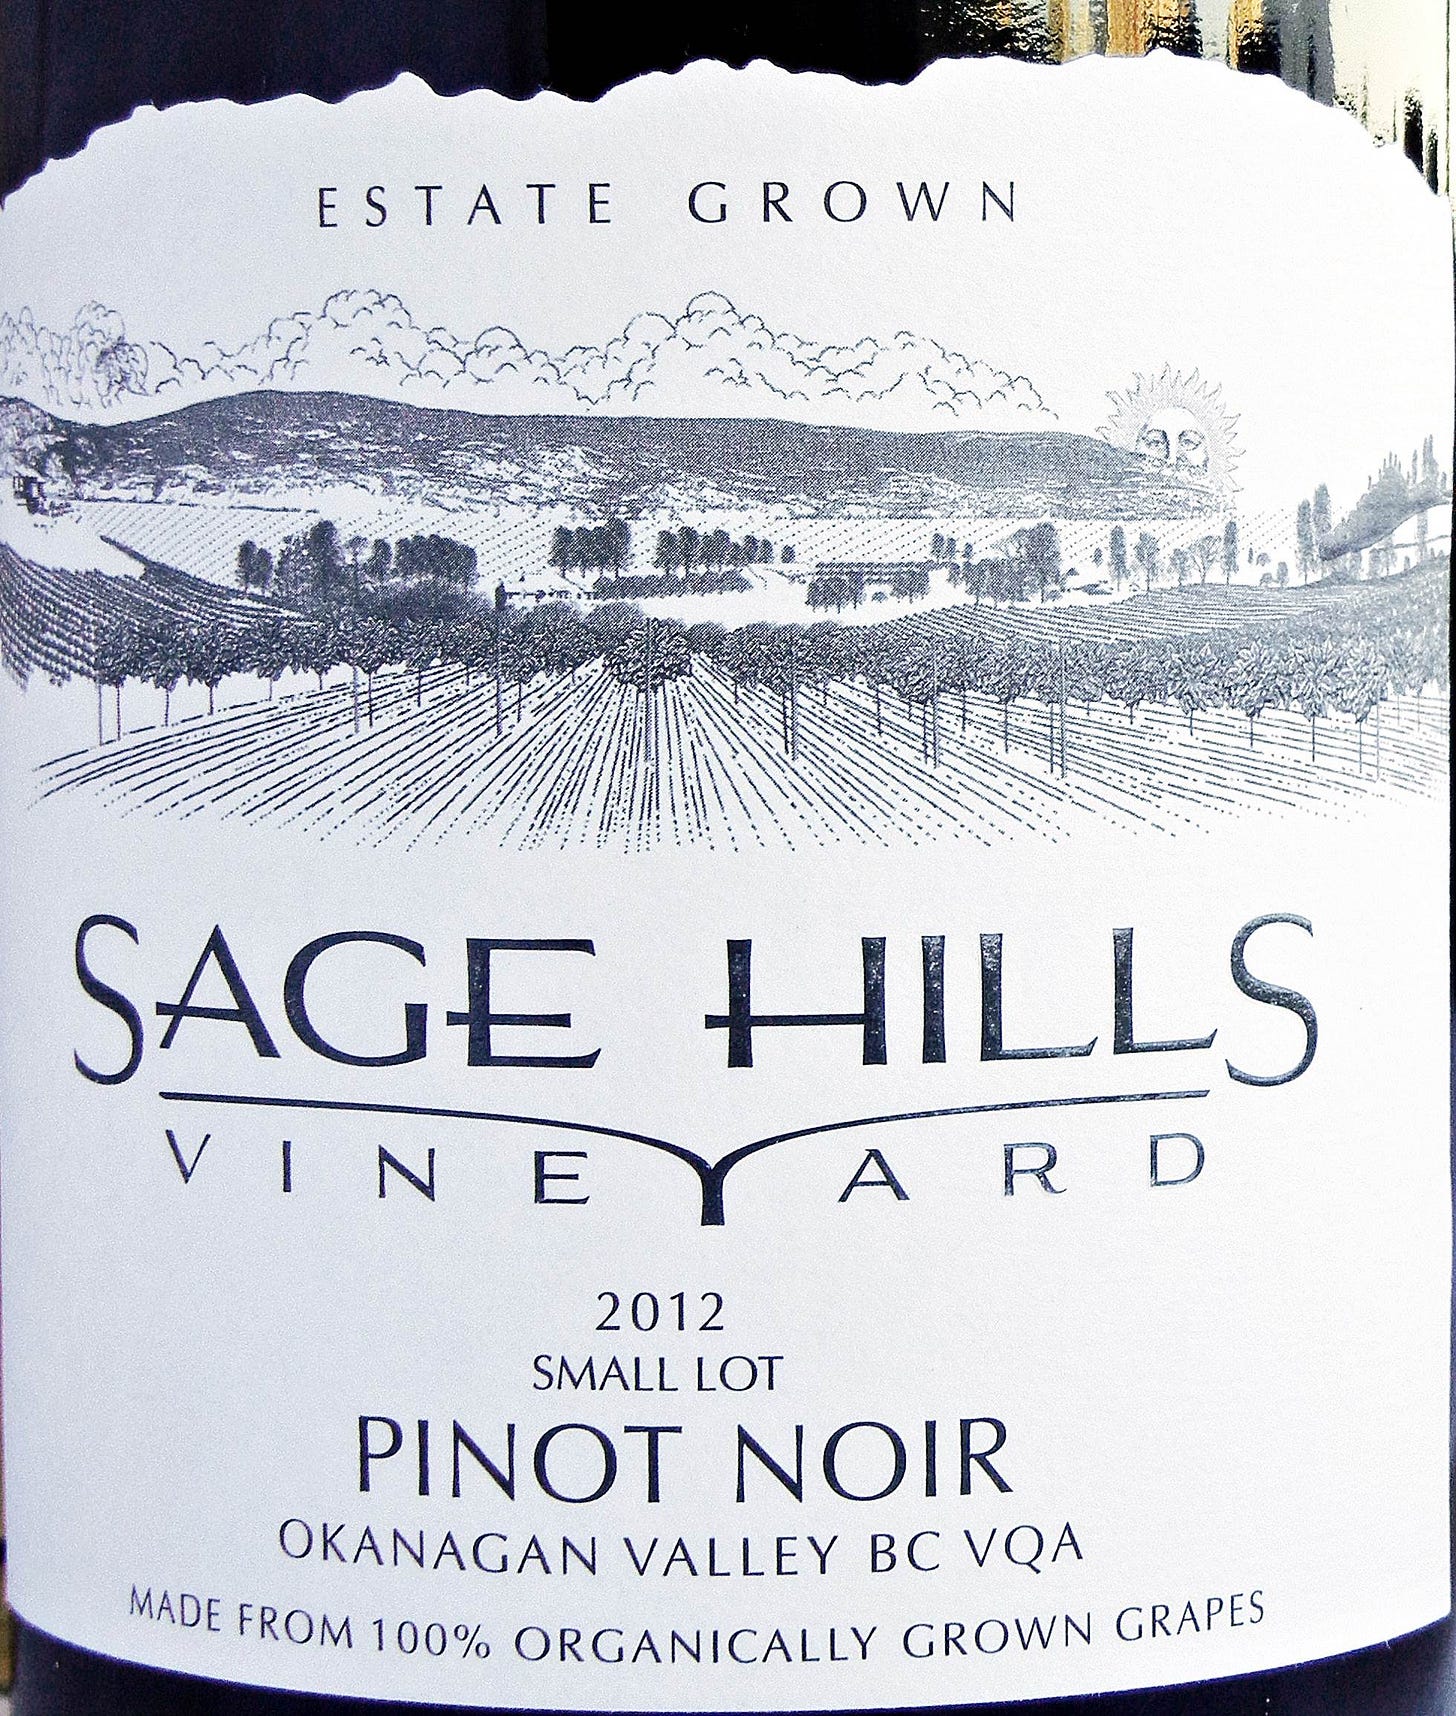 Sage Hills Small Lot Pinot Noir 2012 Label - BC Pinot Noir Tasting Review 18 